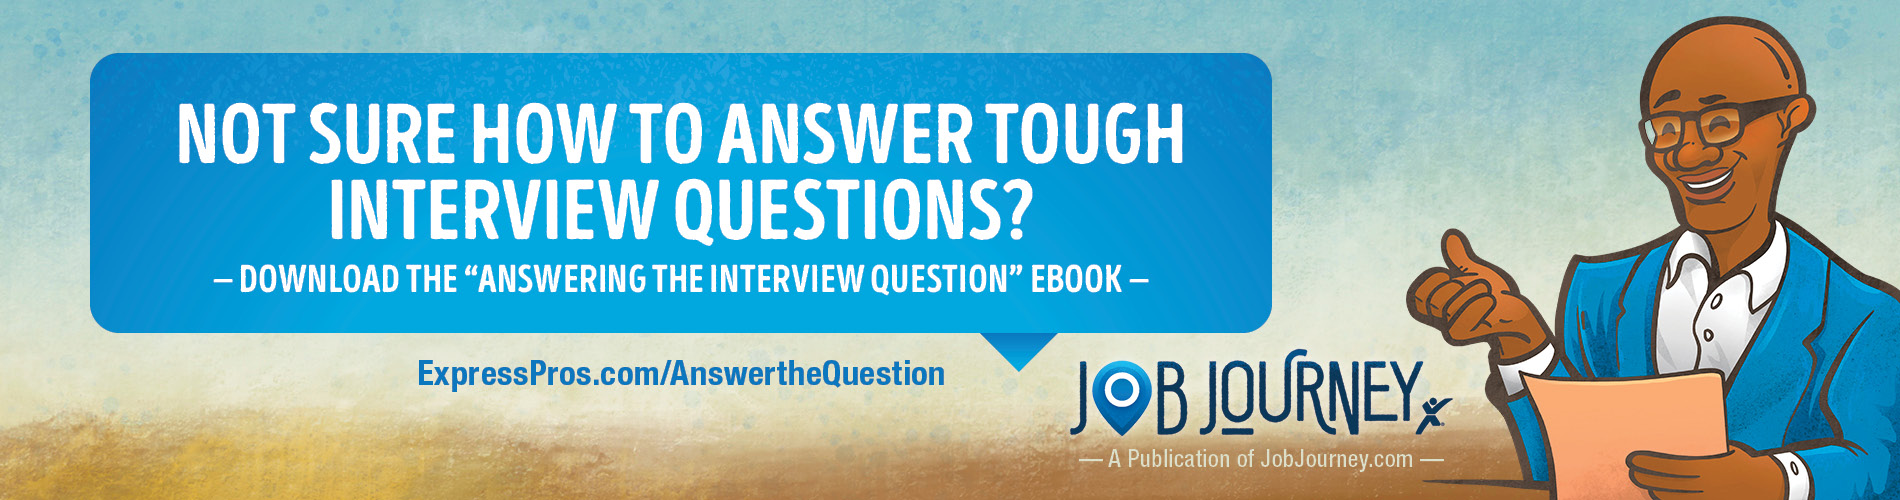 Express Jobs - Answering the Interview Question eBook